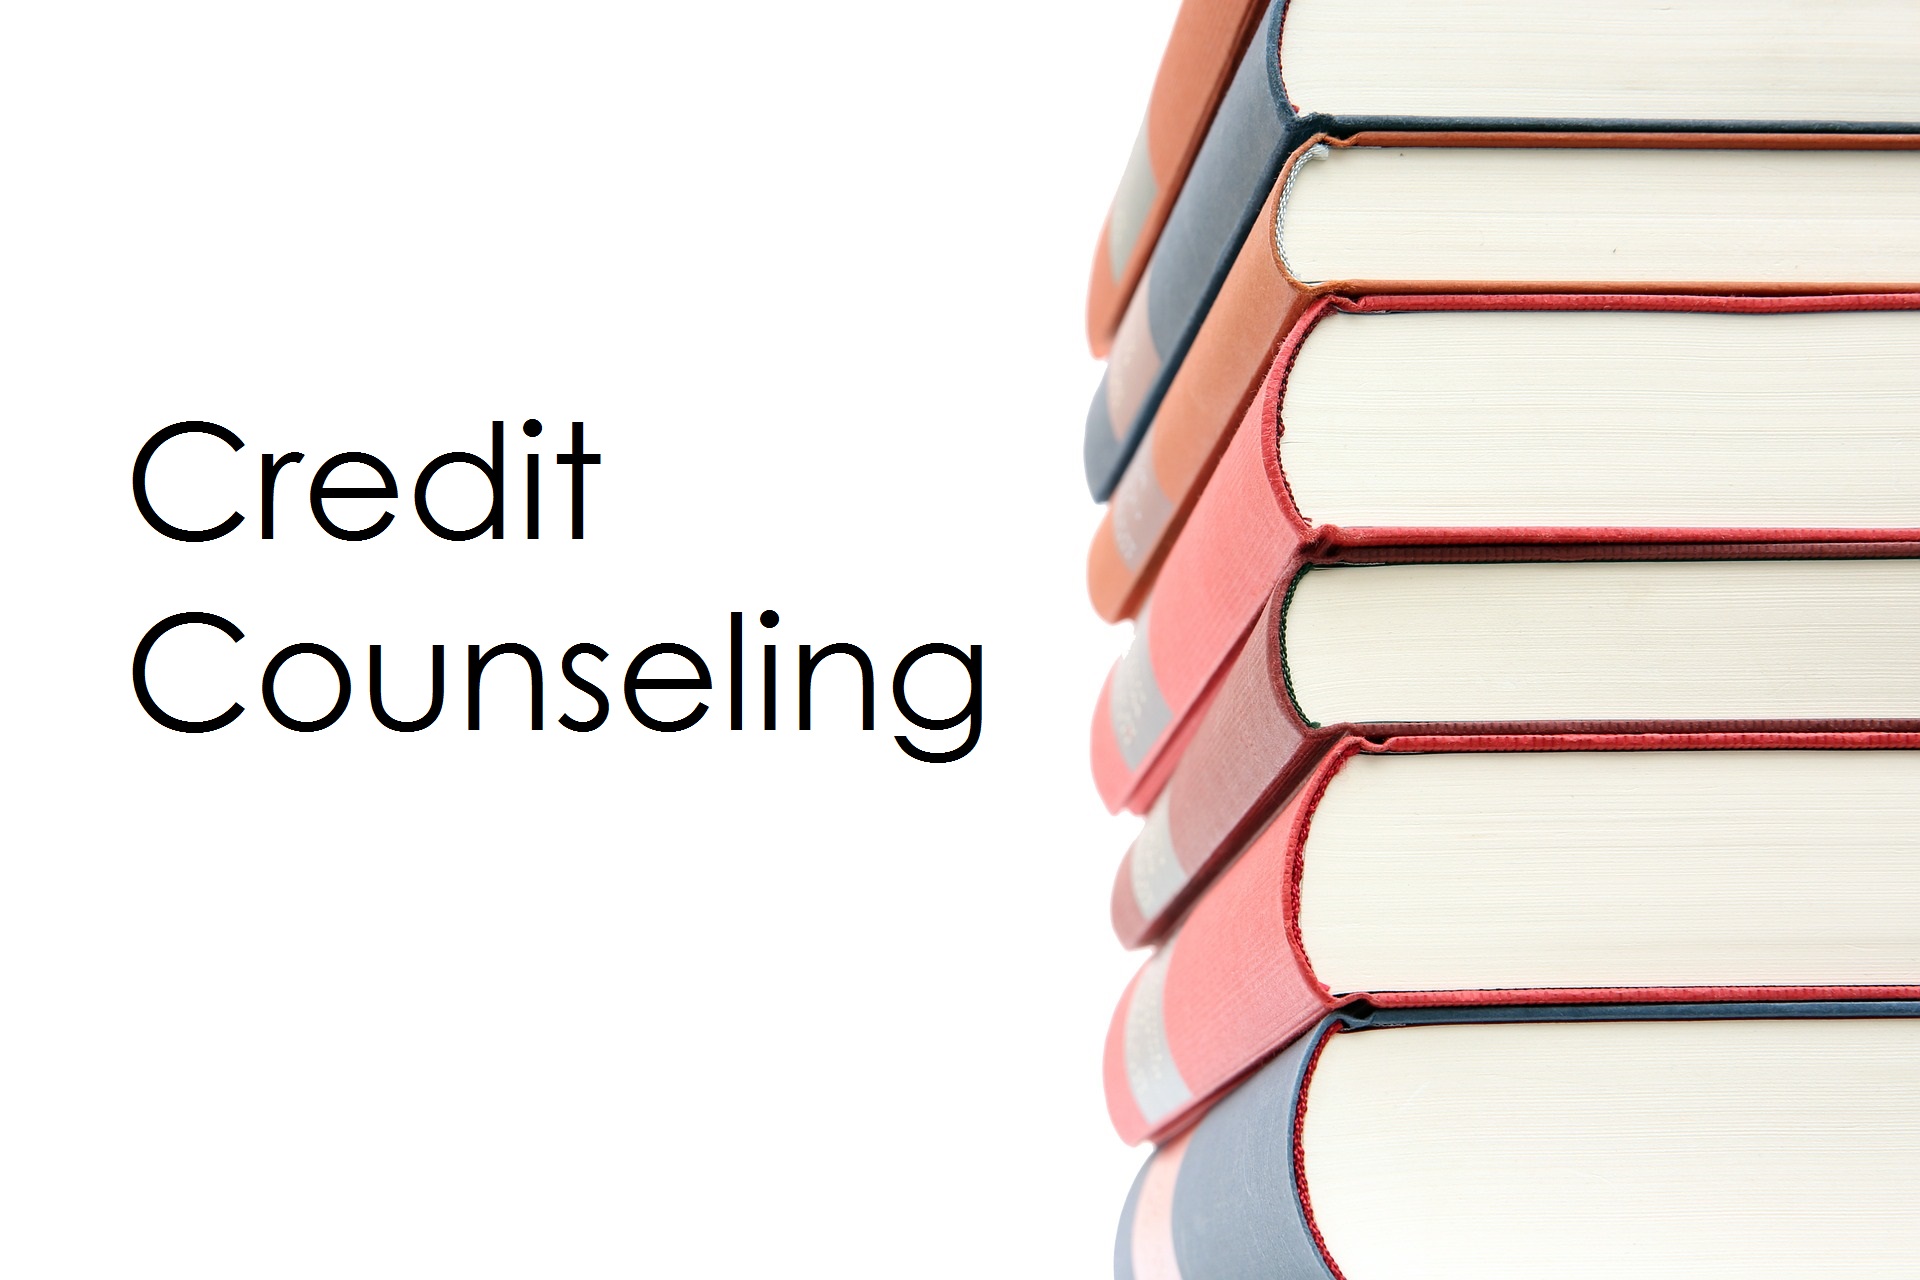 Academic Resources: Credit Counseling